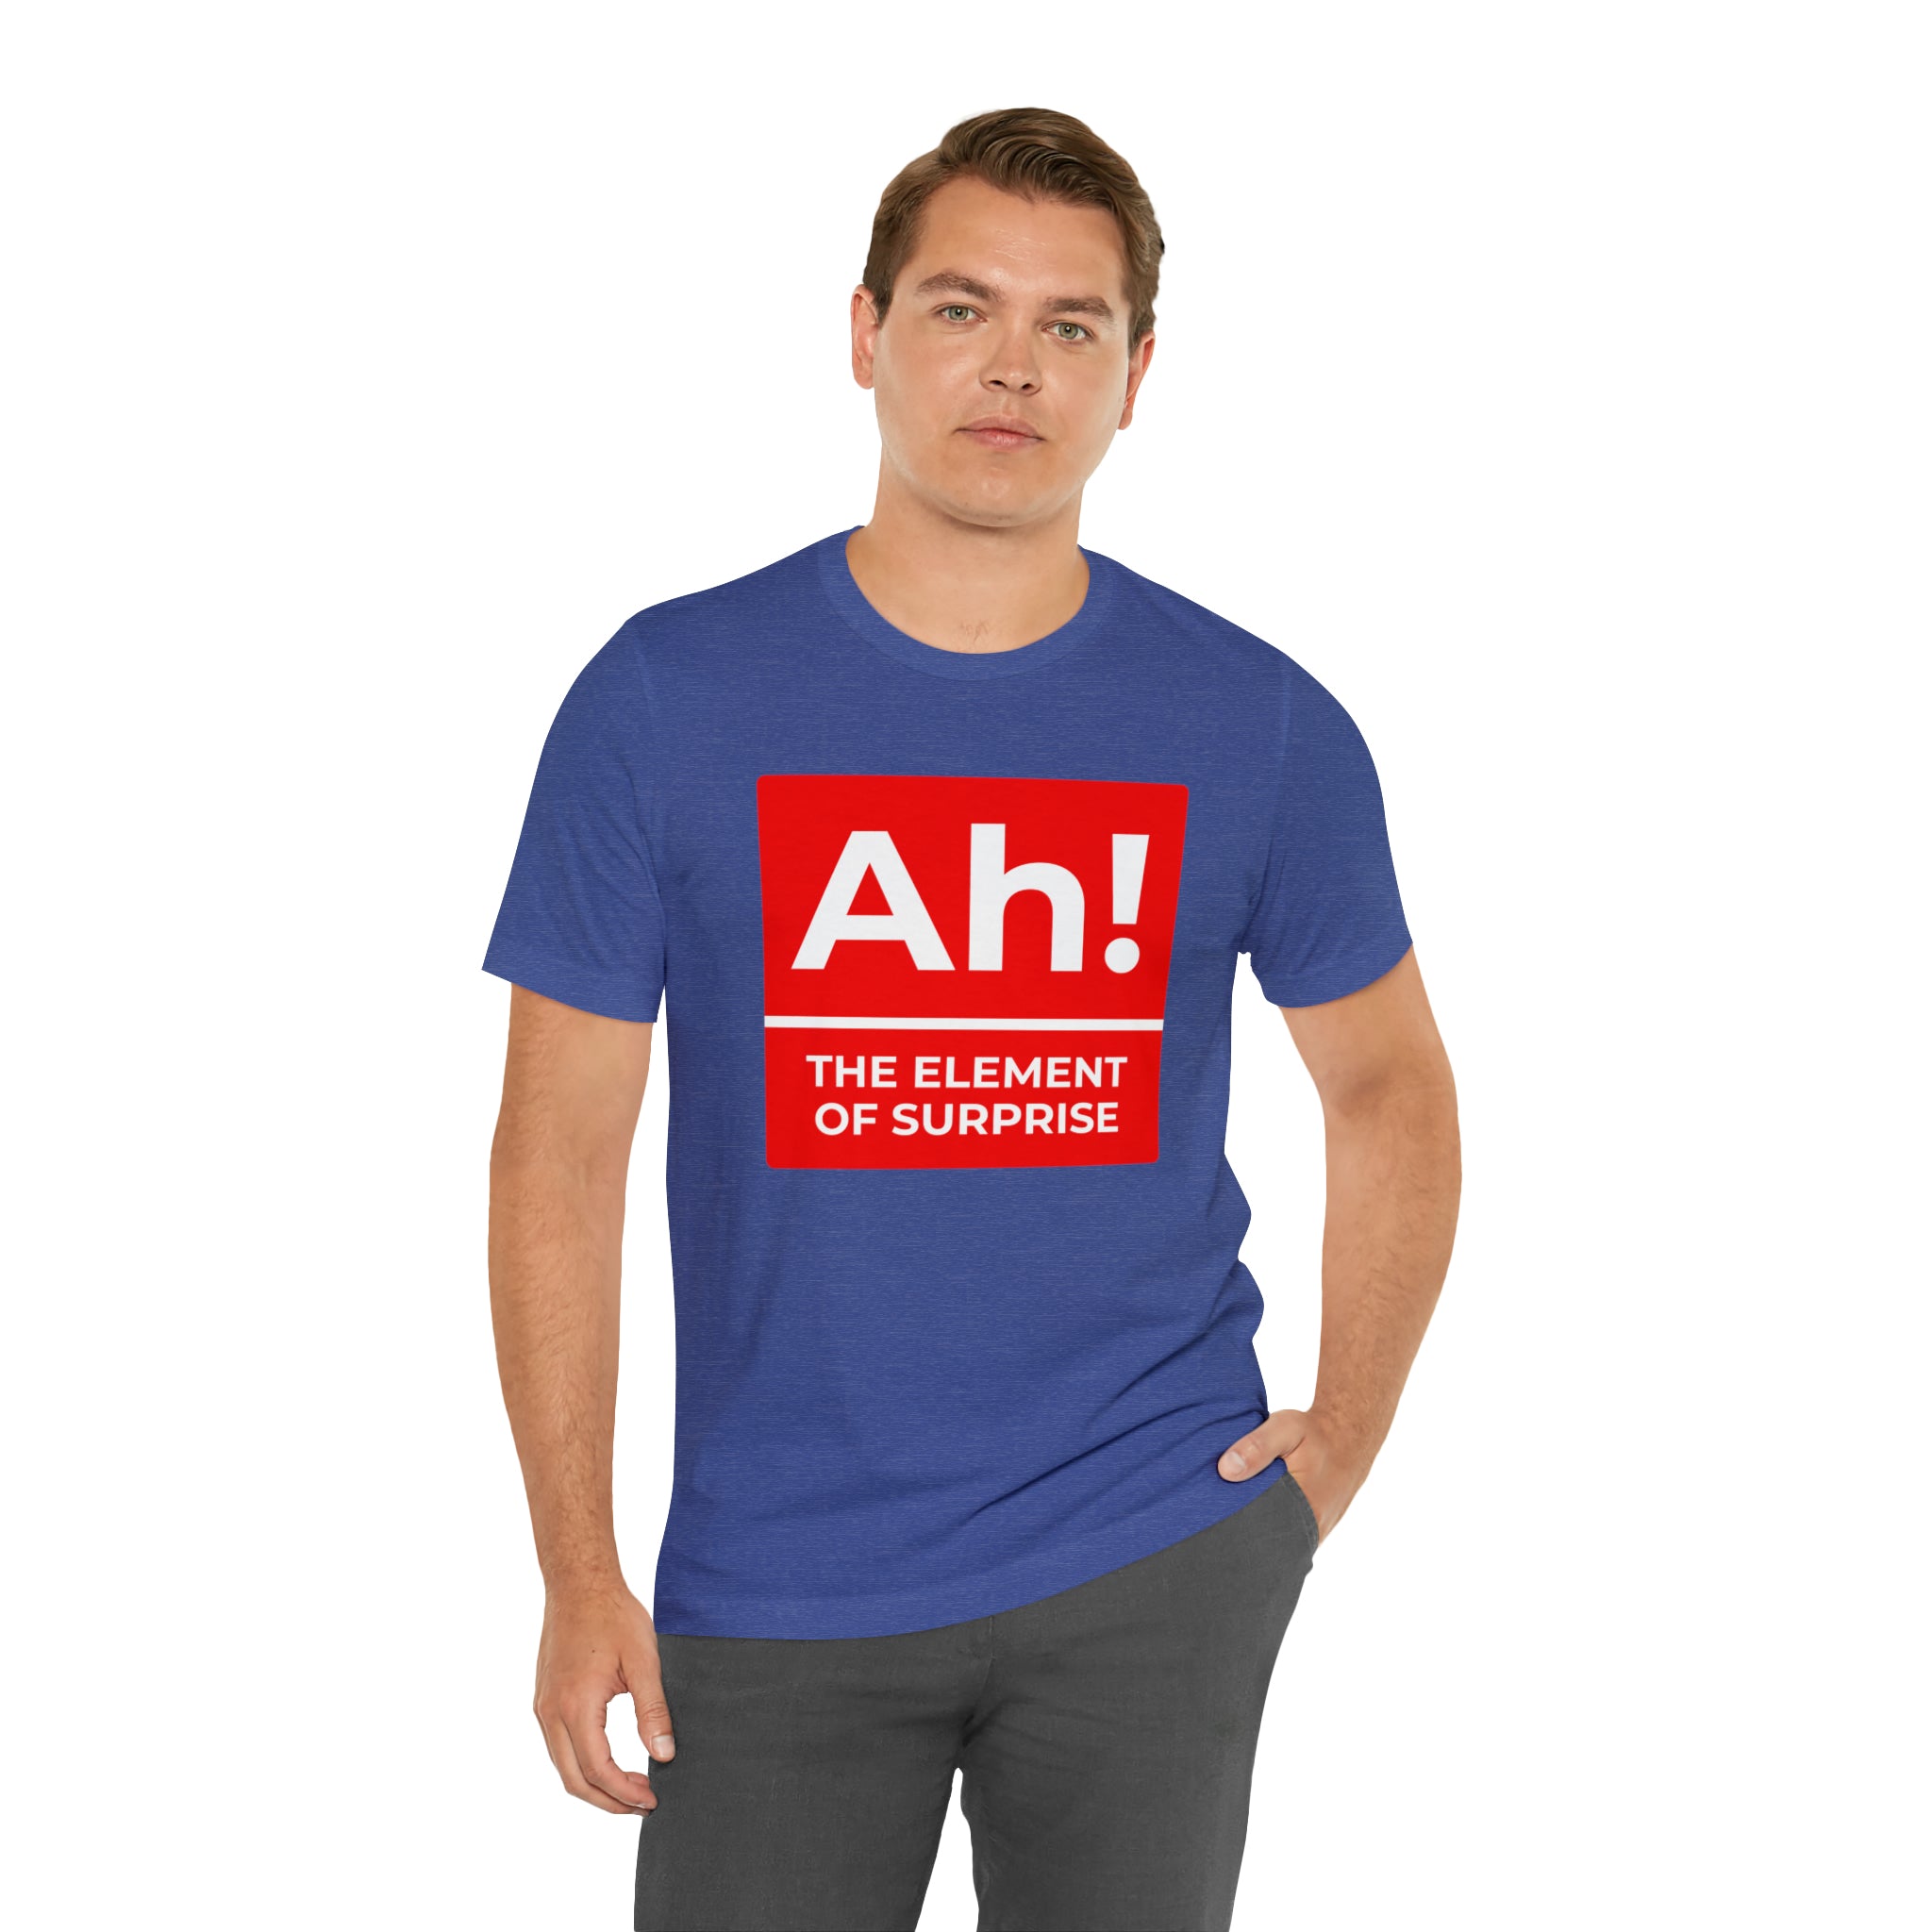 A man wearing an Ah! the Element of Surprise T-shirt represents a science enthusiast.